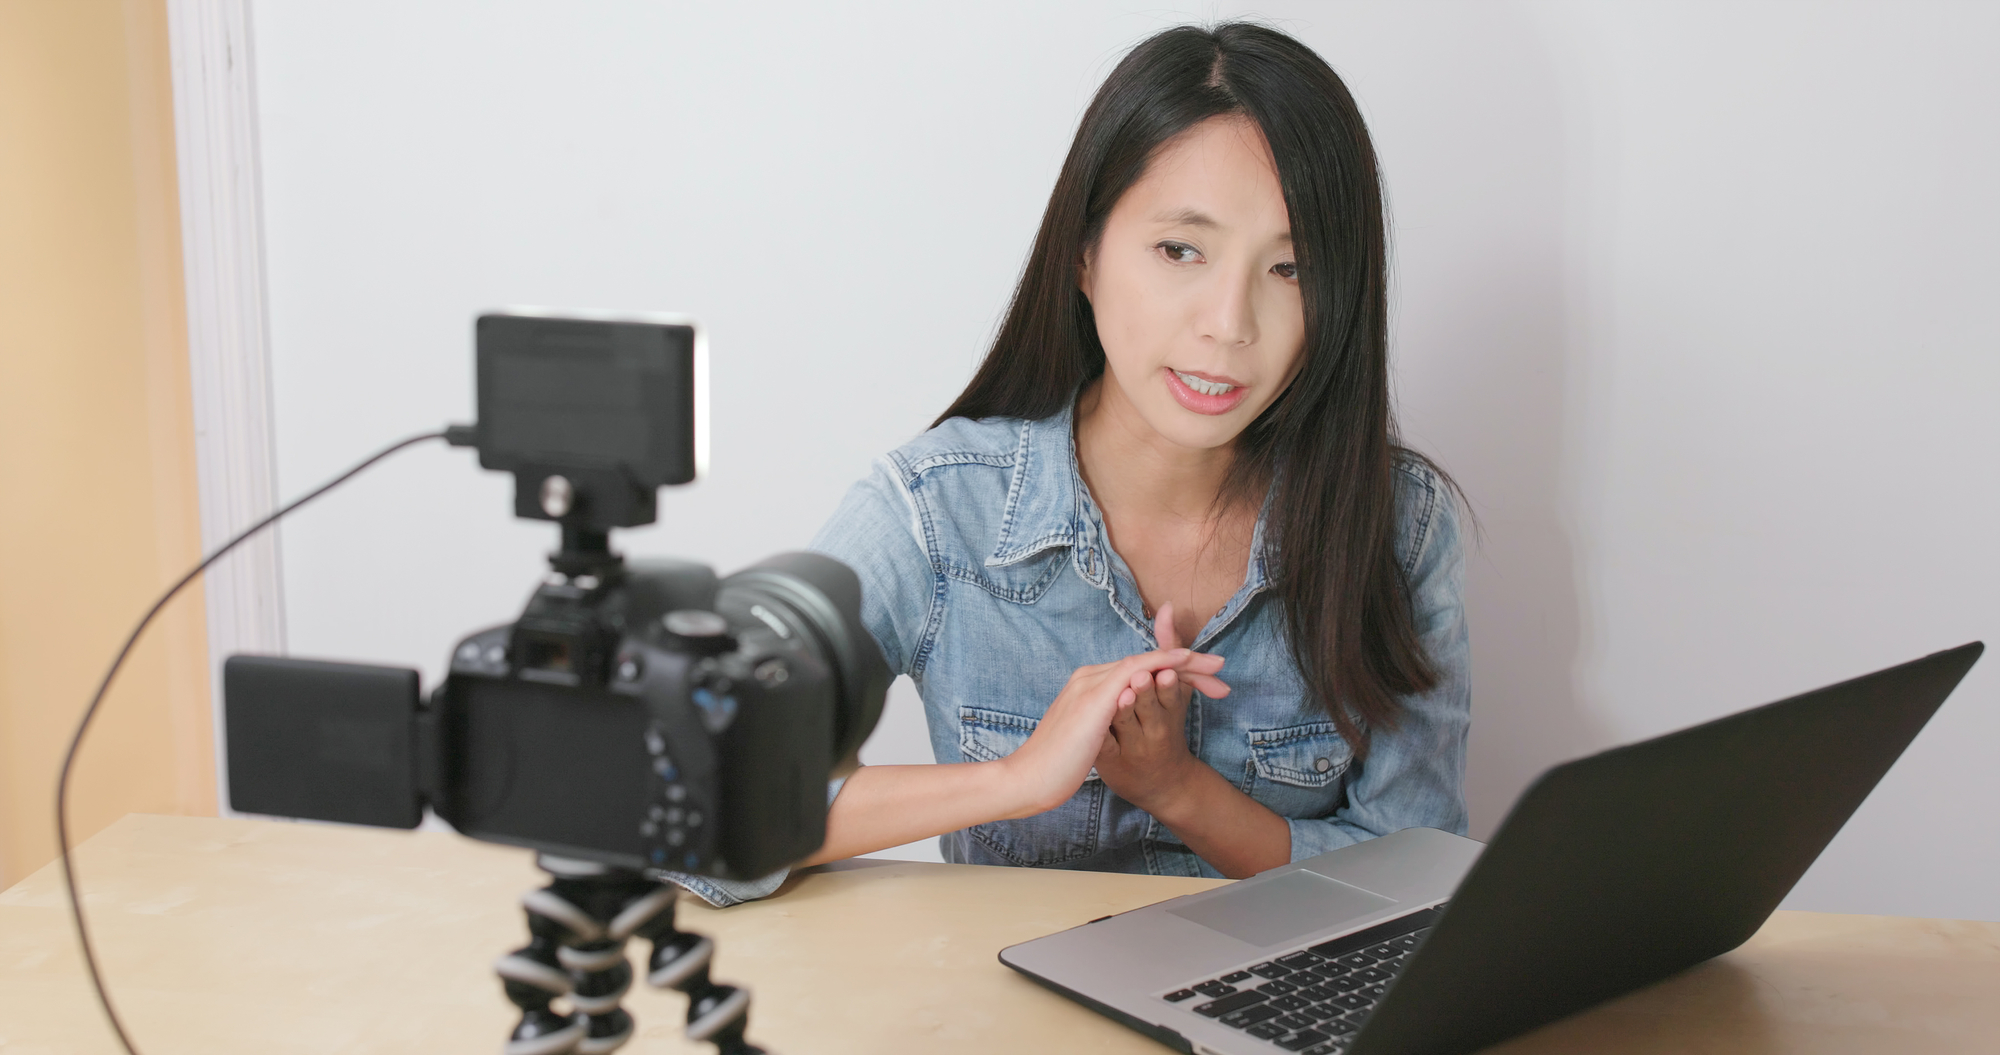 How to Use Video to Tell Professional and Compelling Stories